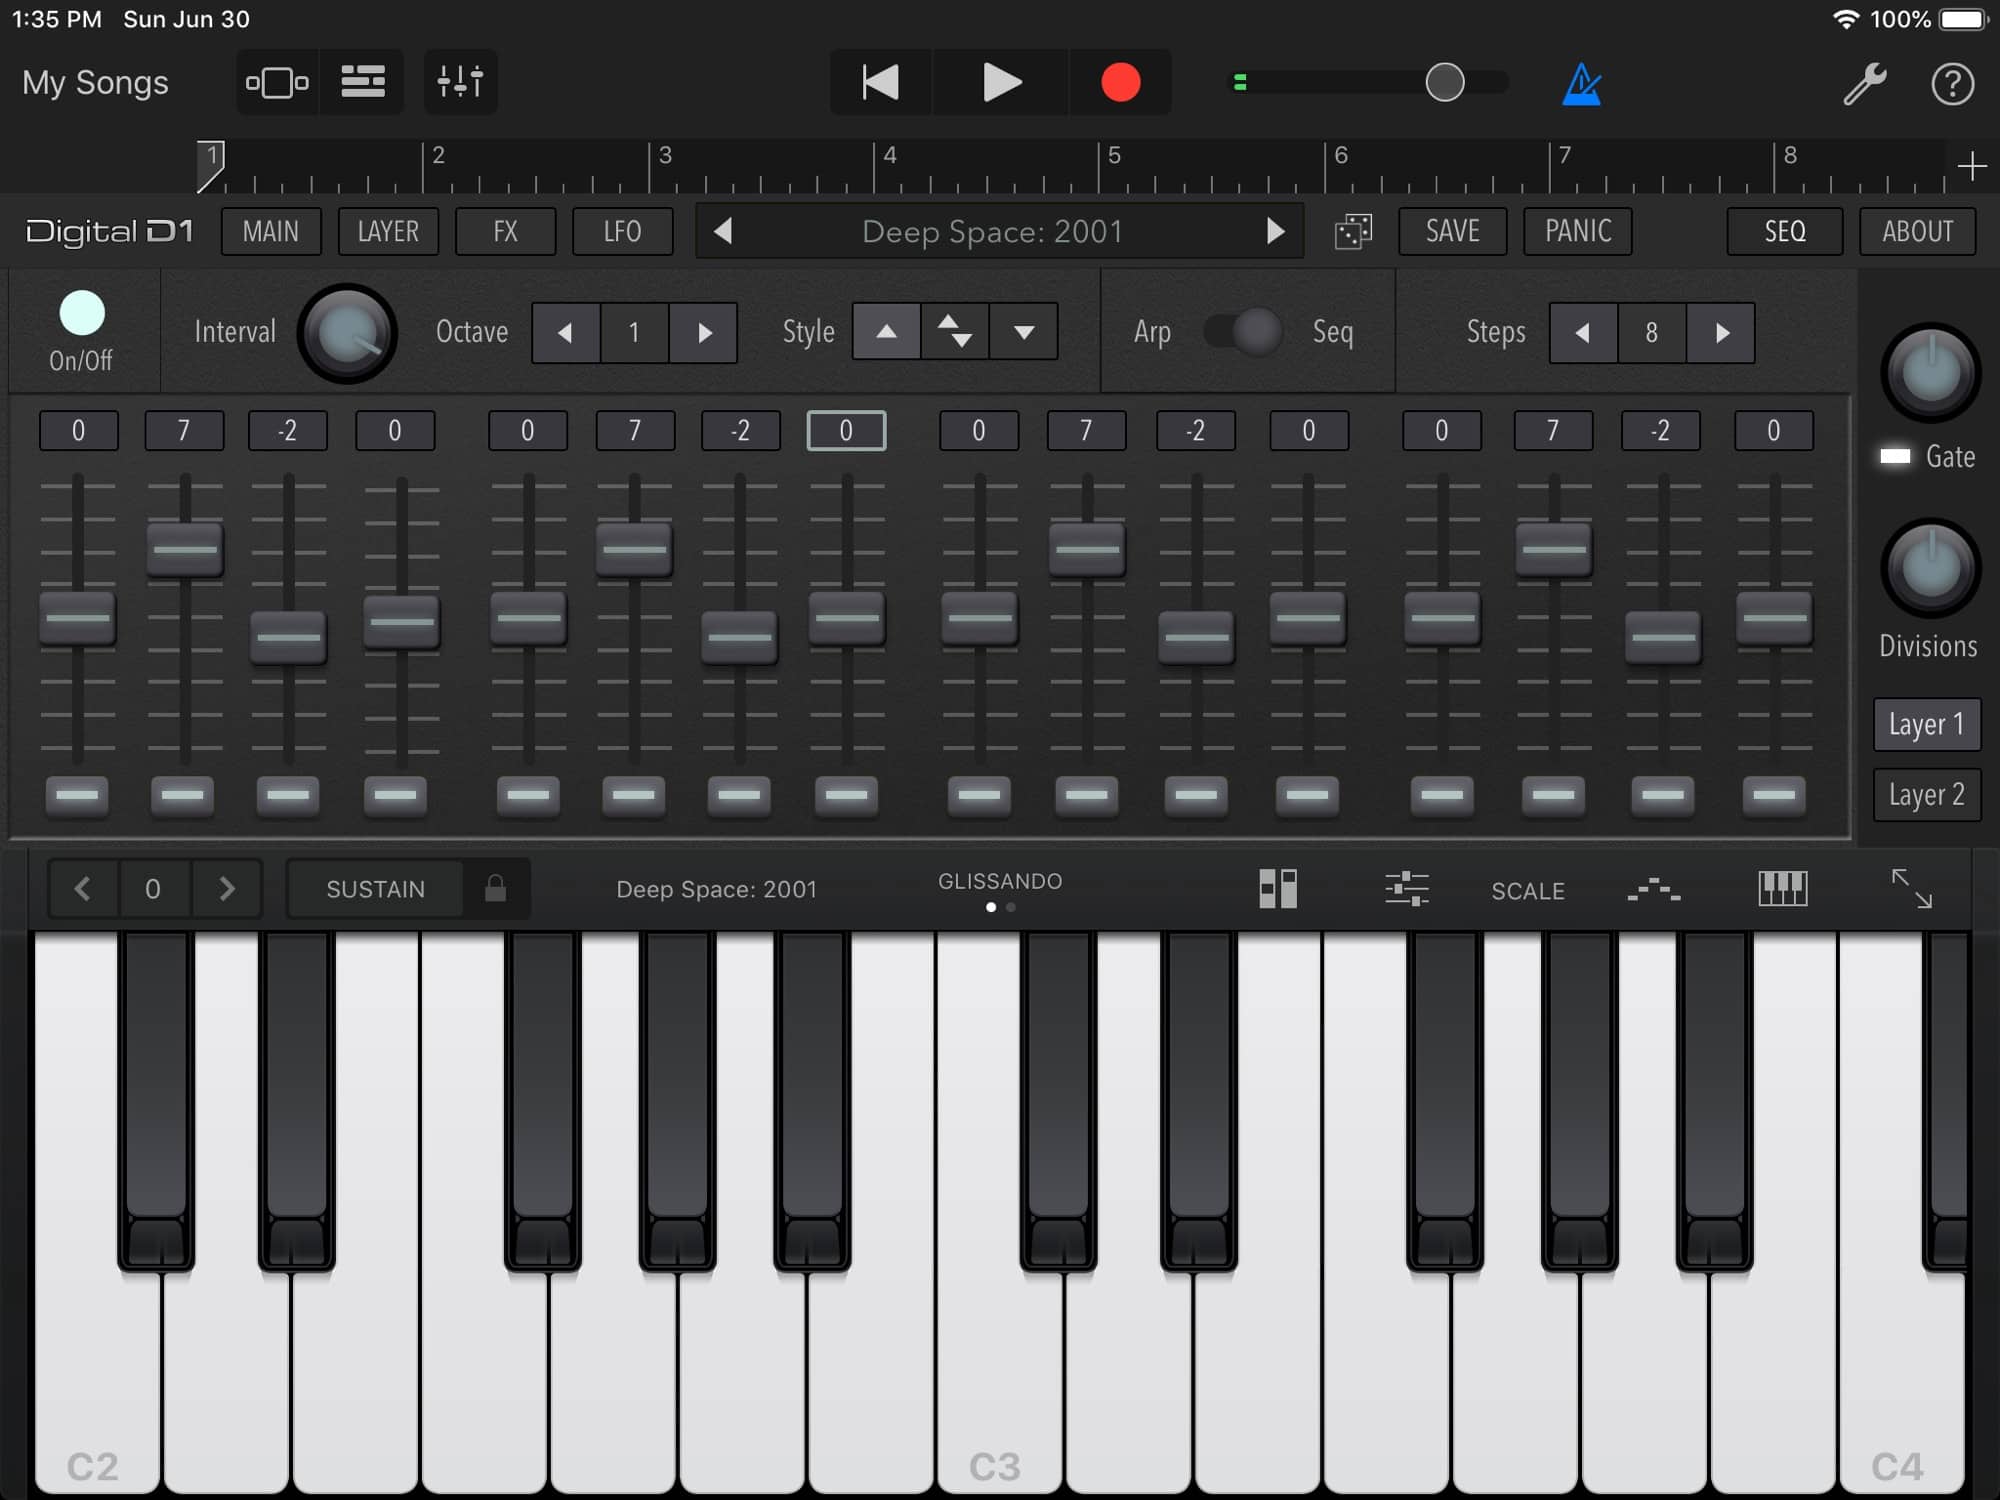 Here is the Digital D1 synth inside GarageBand.